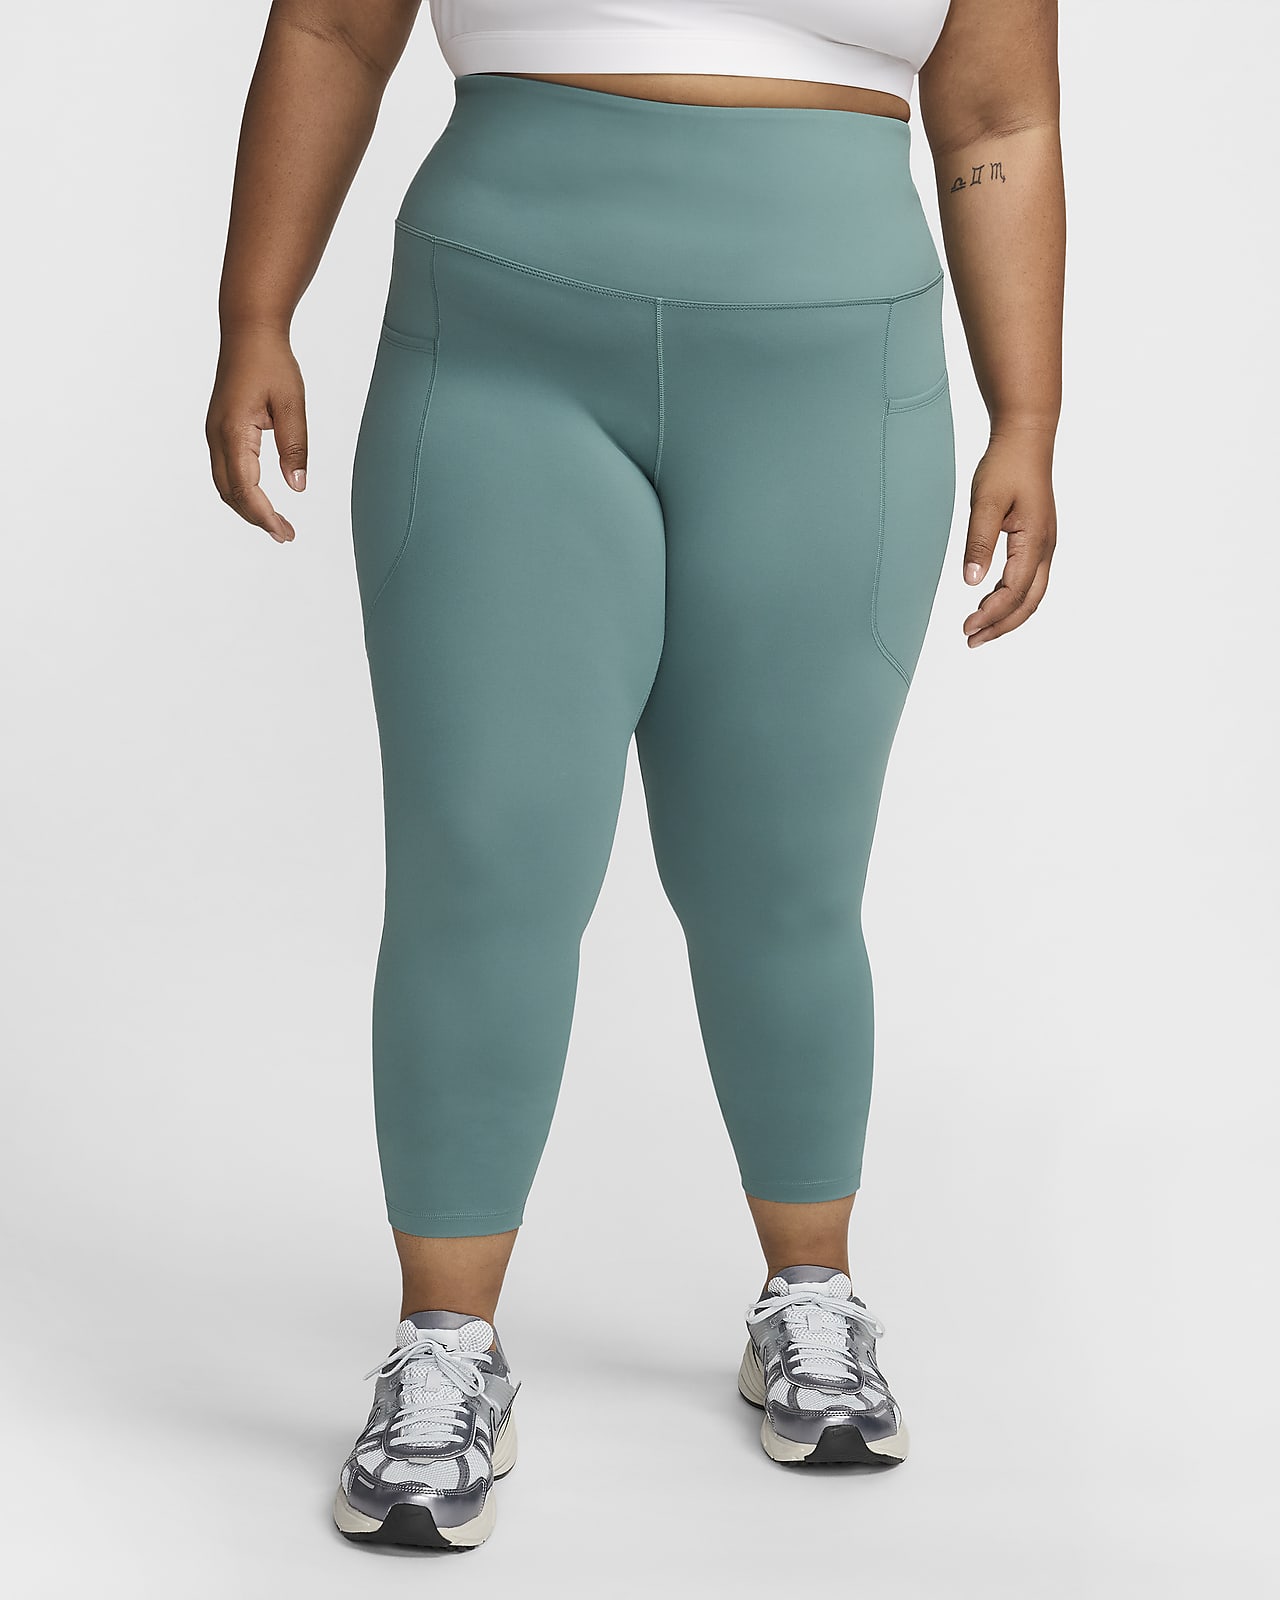 Nike One Women's High-Waisted 7/8 Leggings with Pockets (Plus Size).